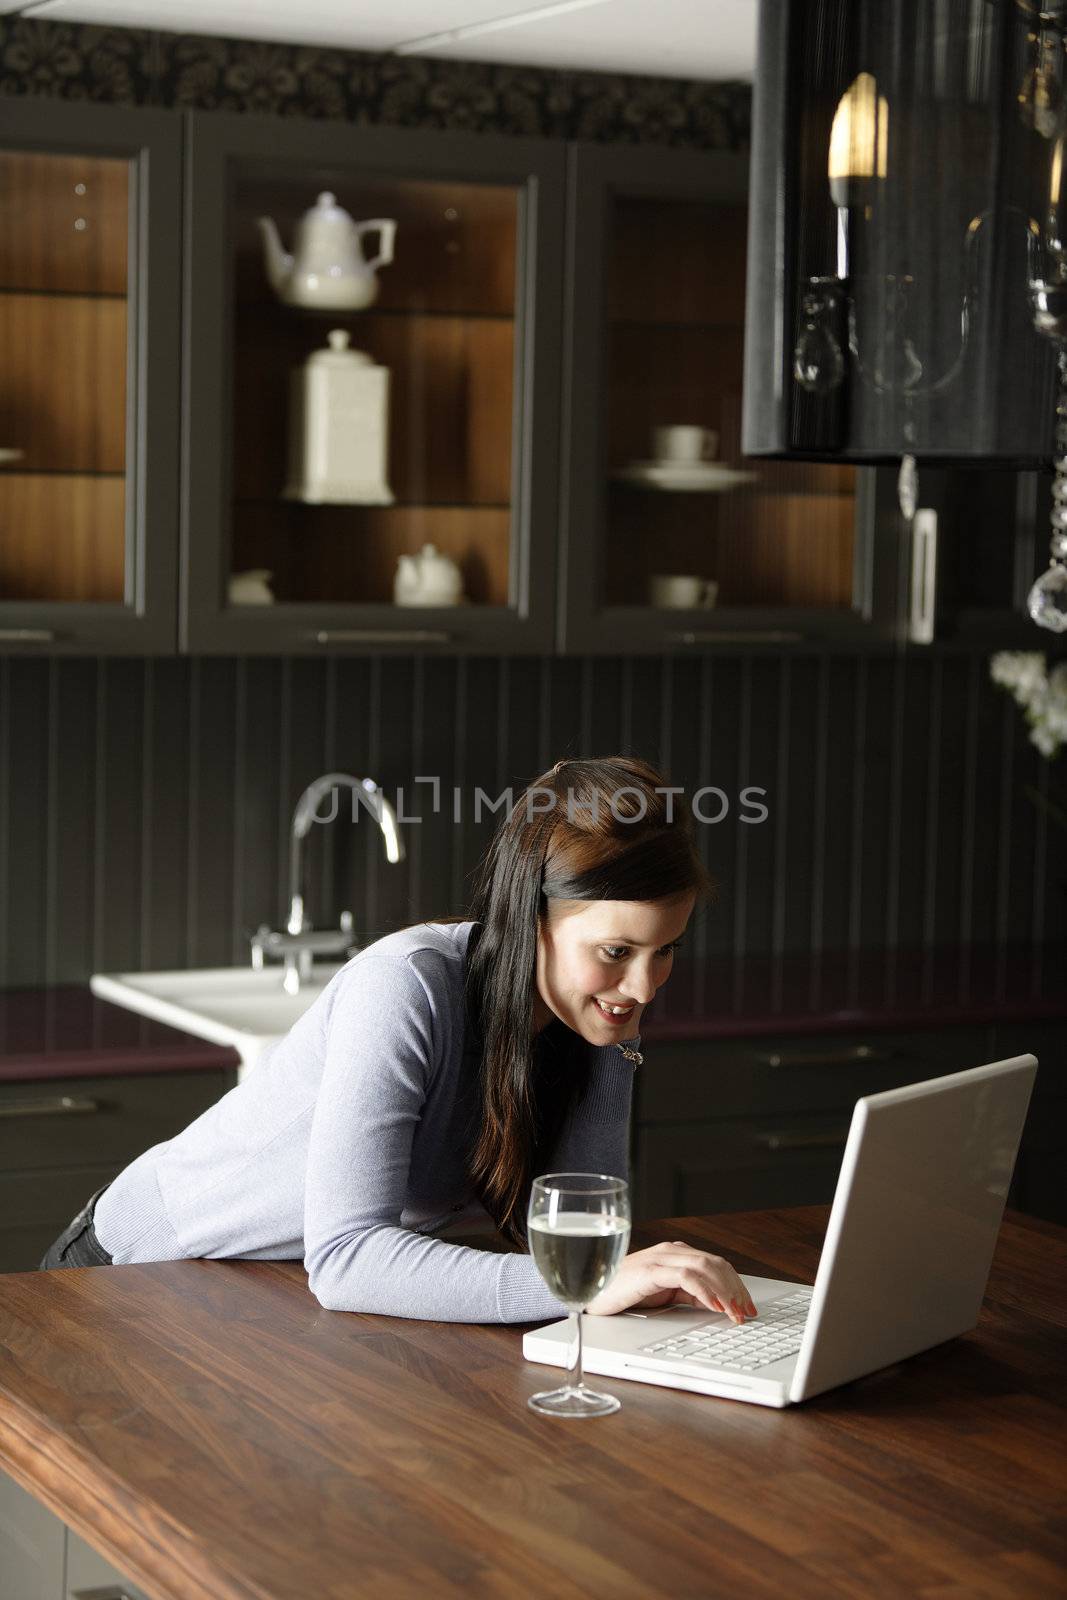 Attractive young woman using her laptop in the kitchen